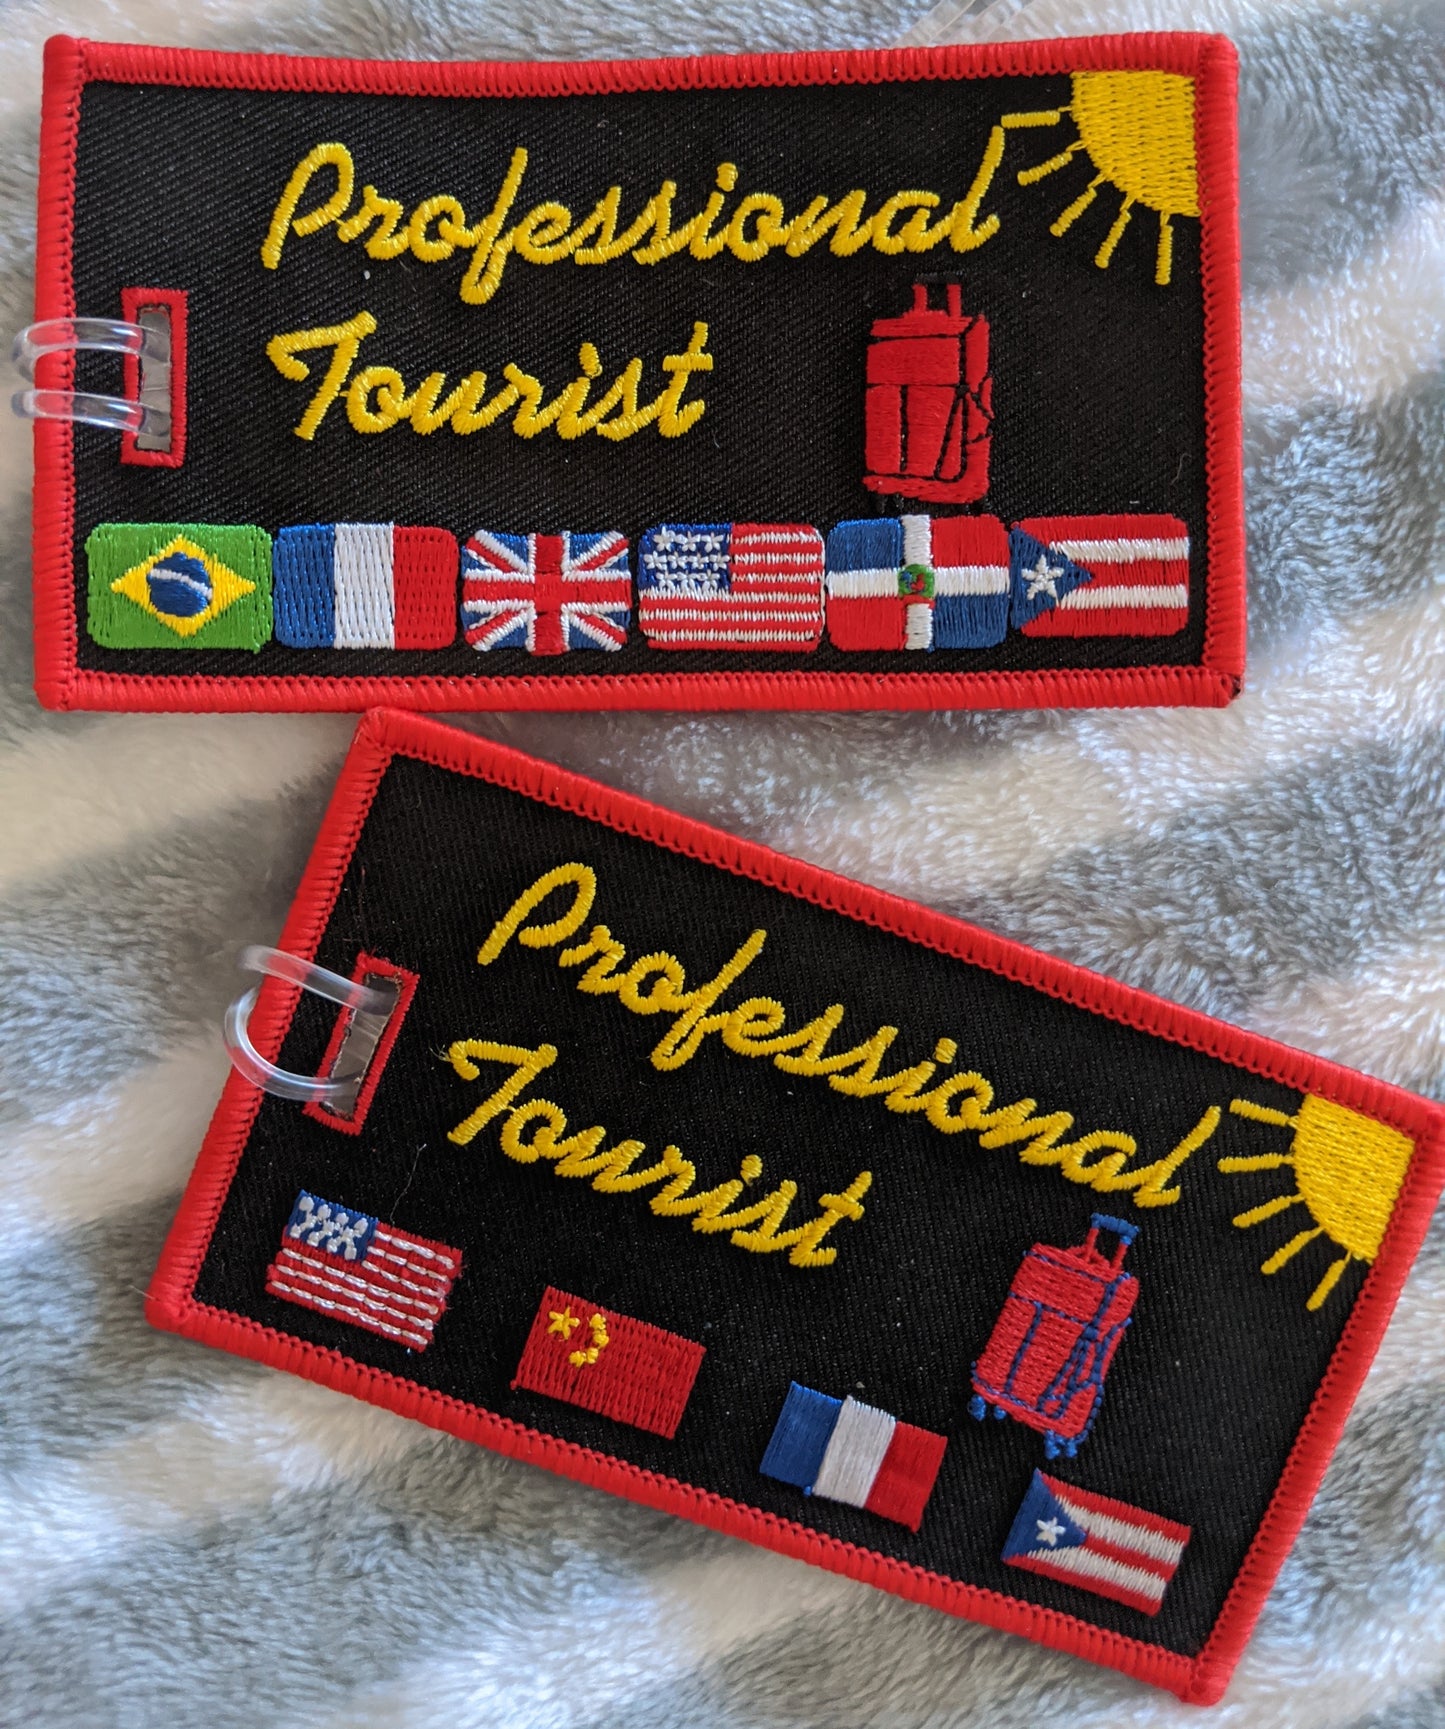 PROFESSIONAL TOURIST Luggage Tags. Black background